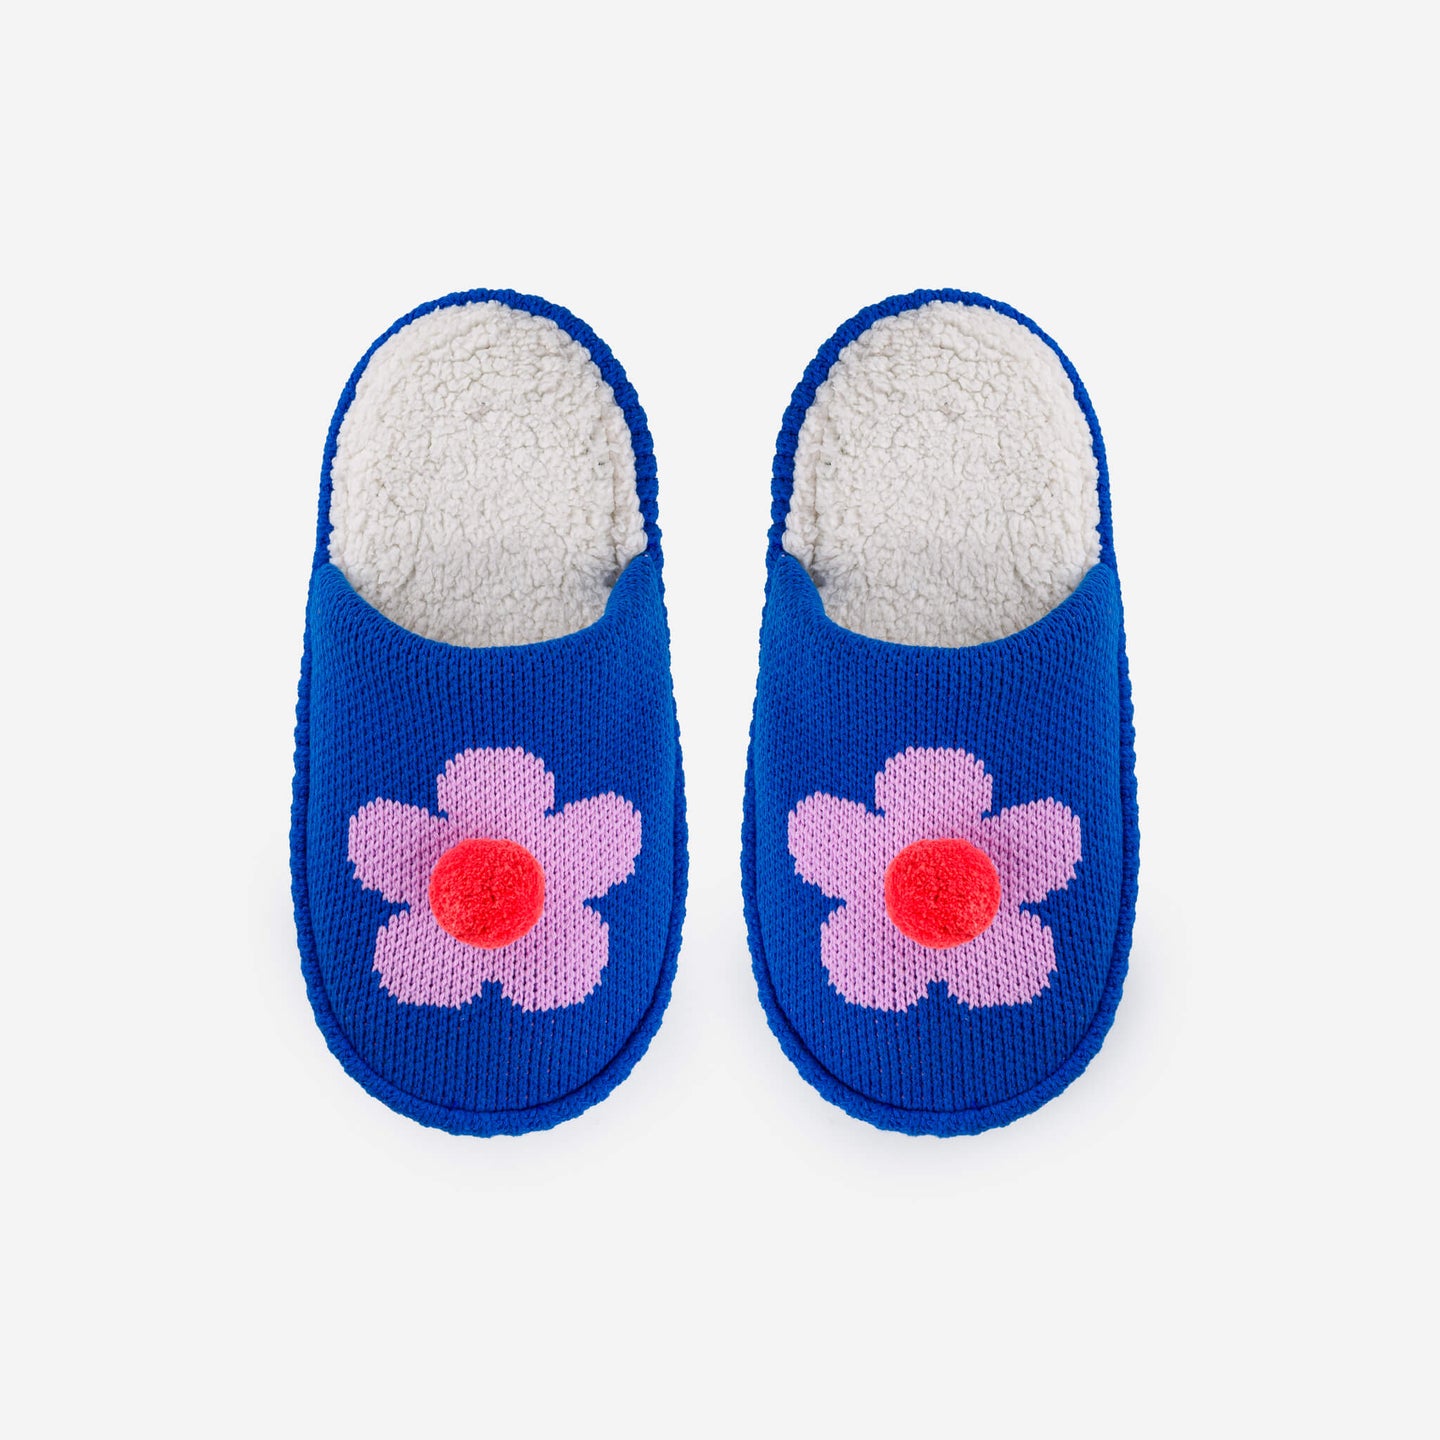 Flower Pom Slide Slippers Cute Spa Slippers Daisy Comfy Cozy Warm Backless Slides